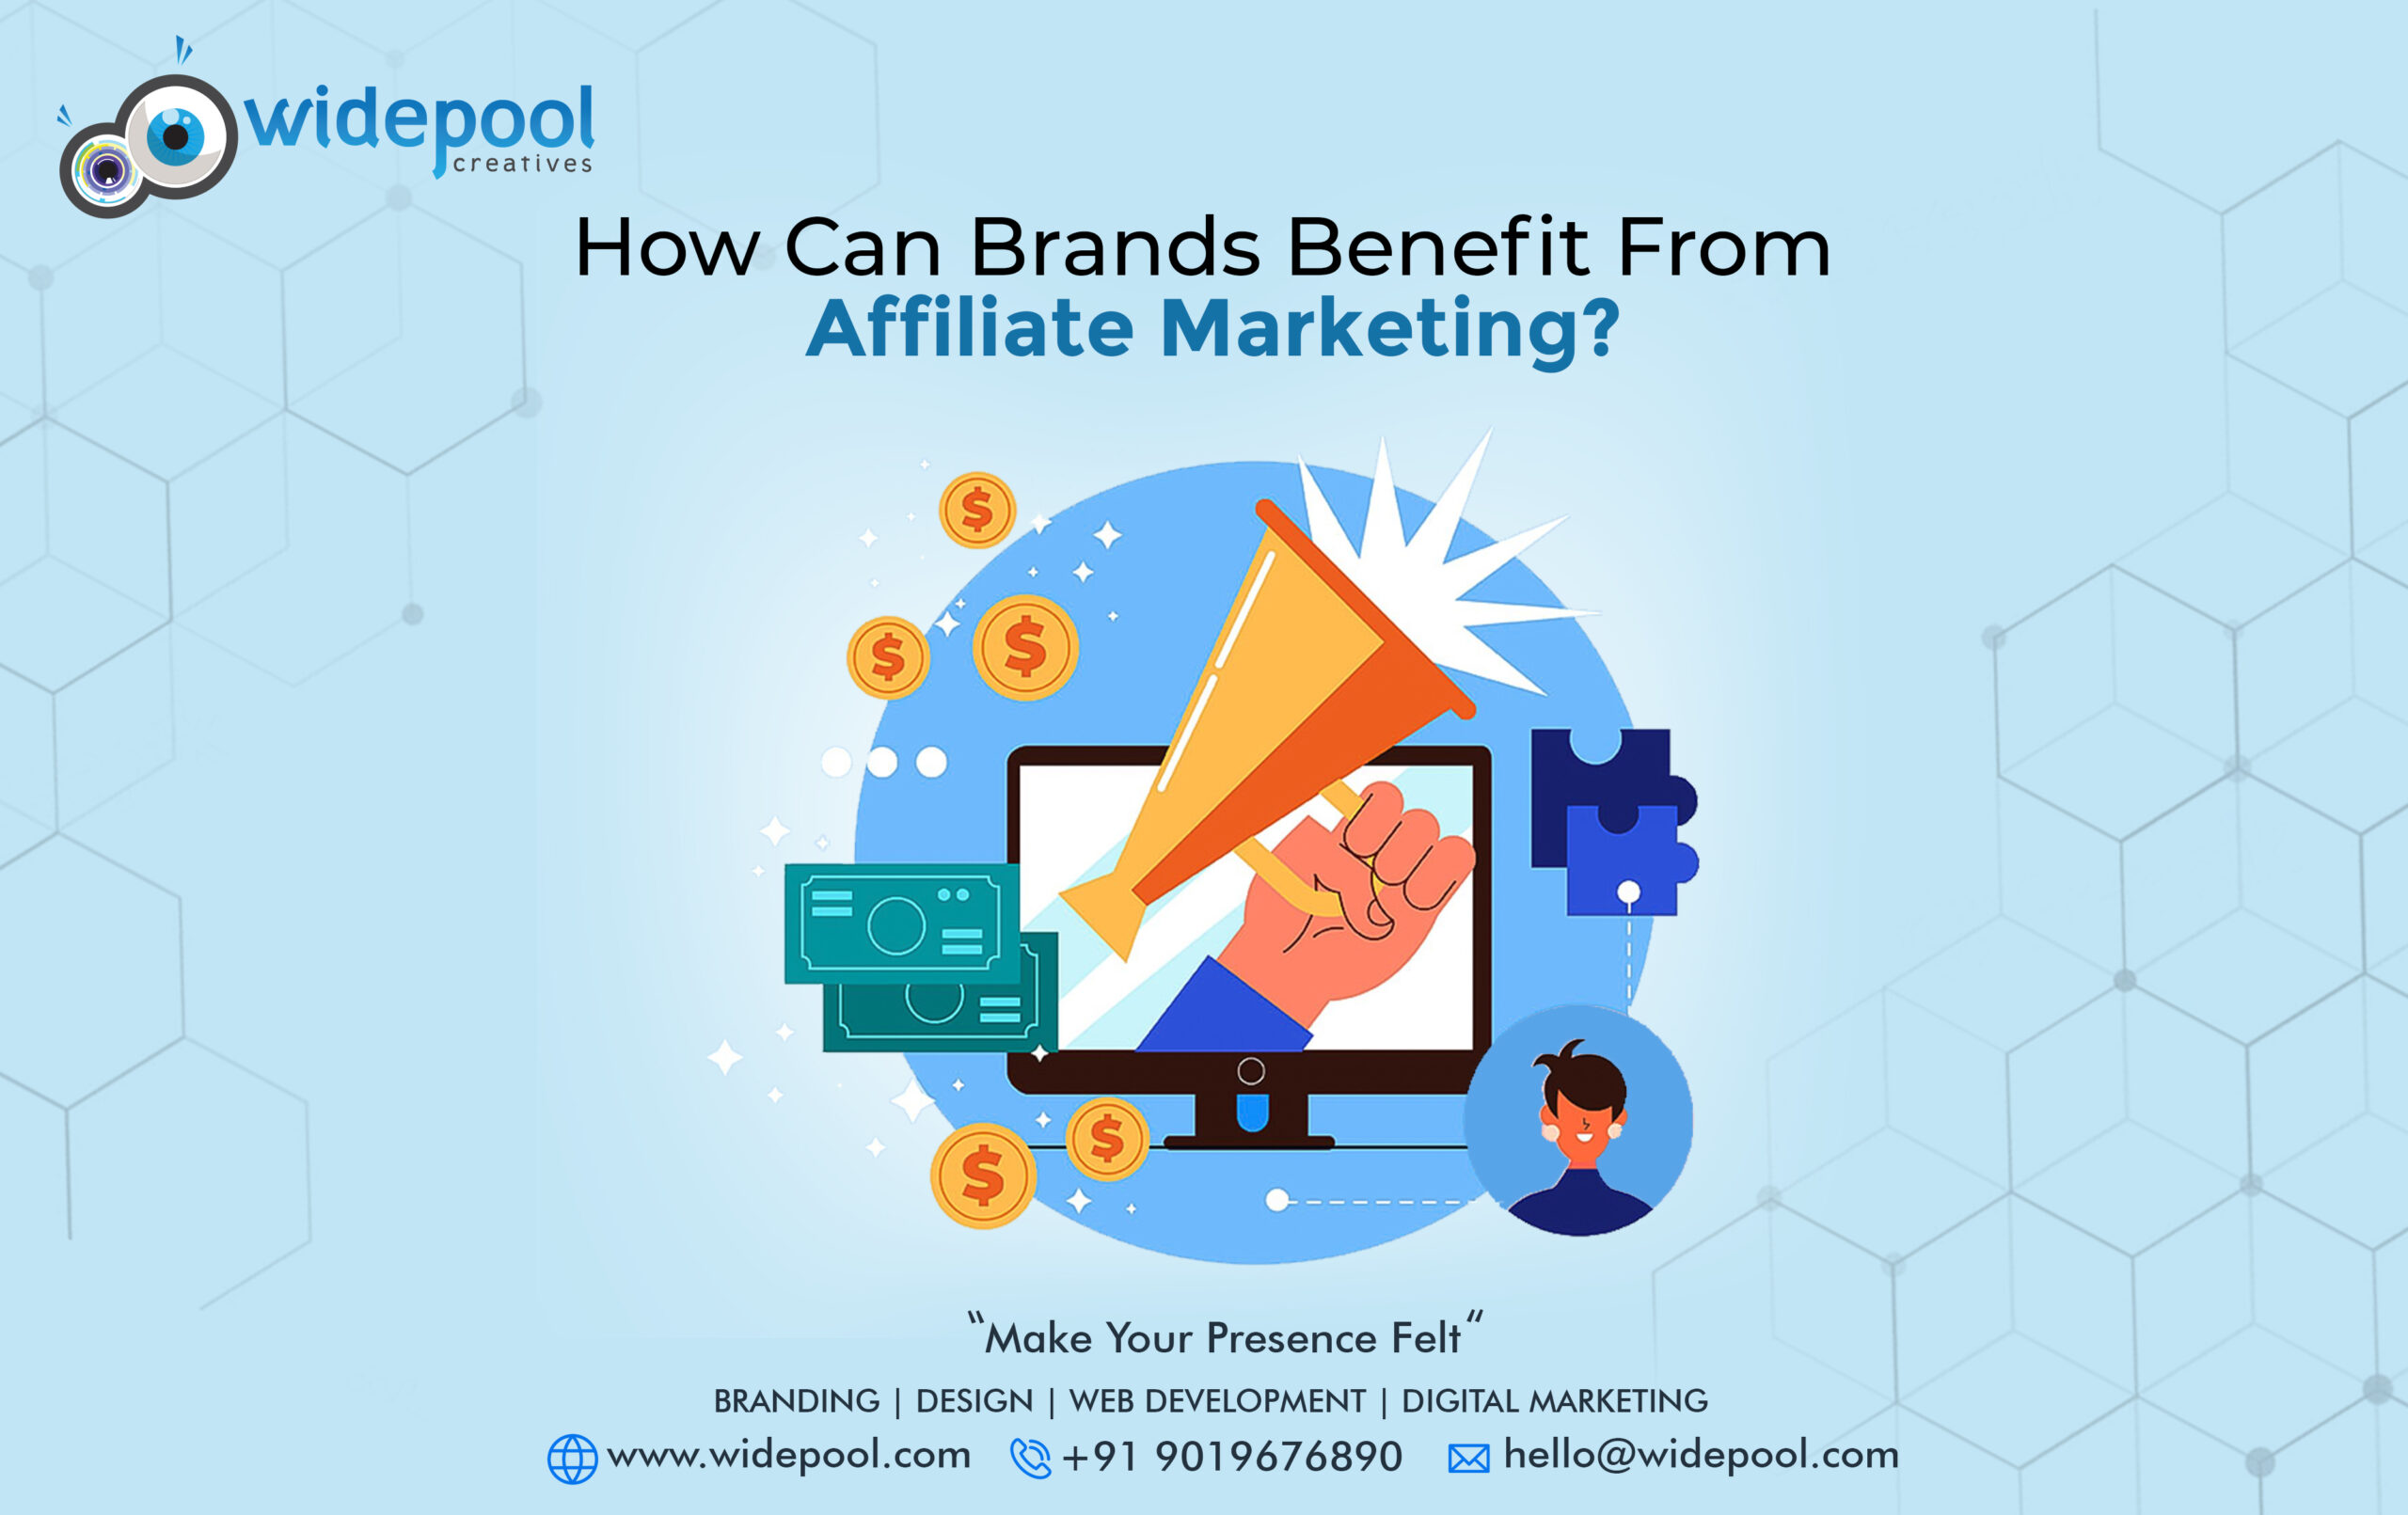 How Can Brands Benefit from Affiliate Marketing?